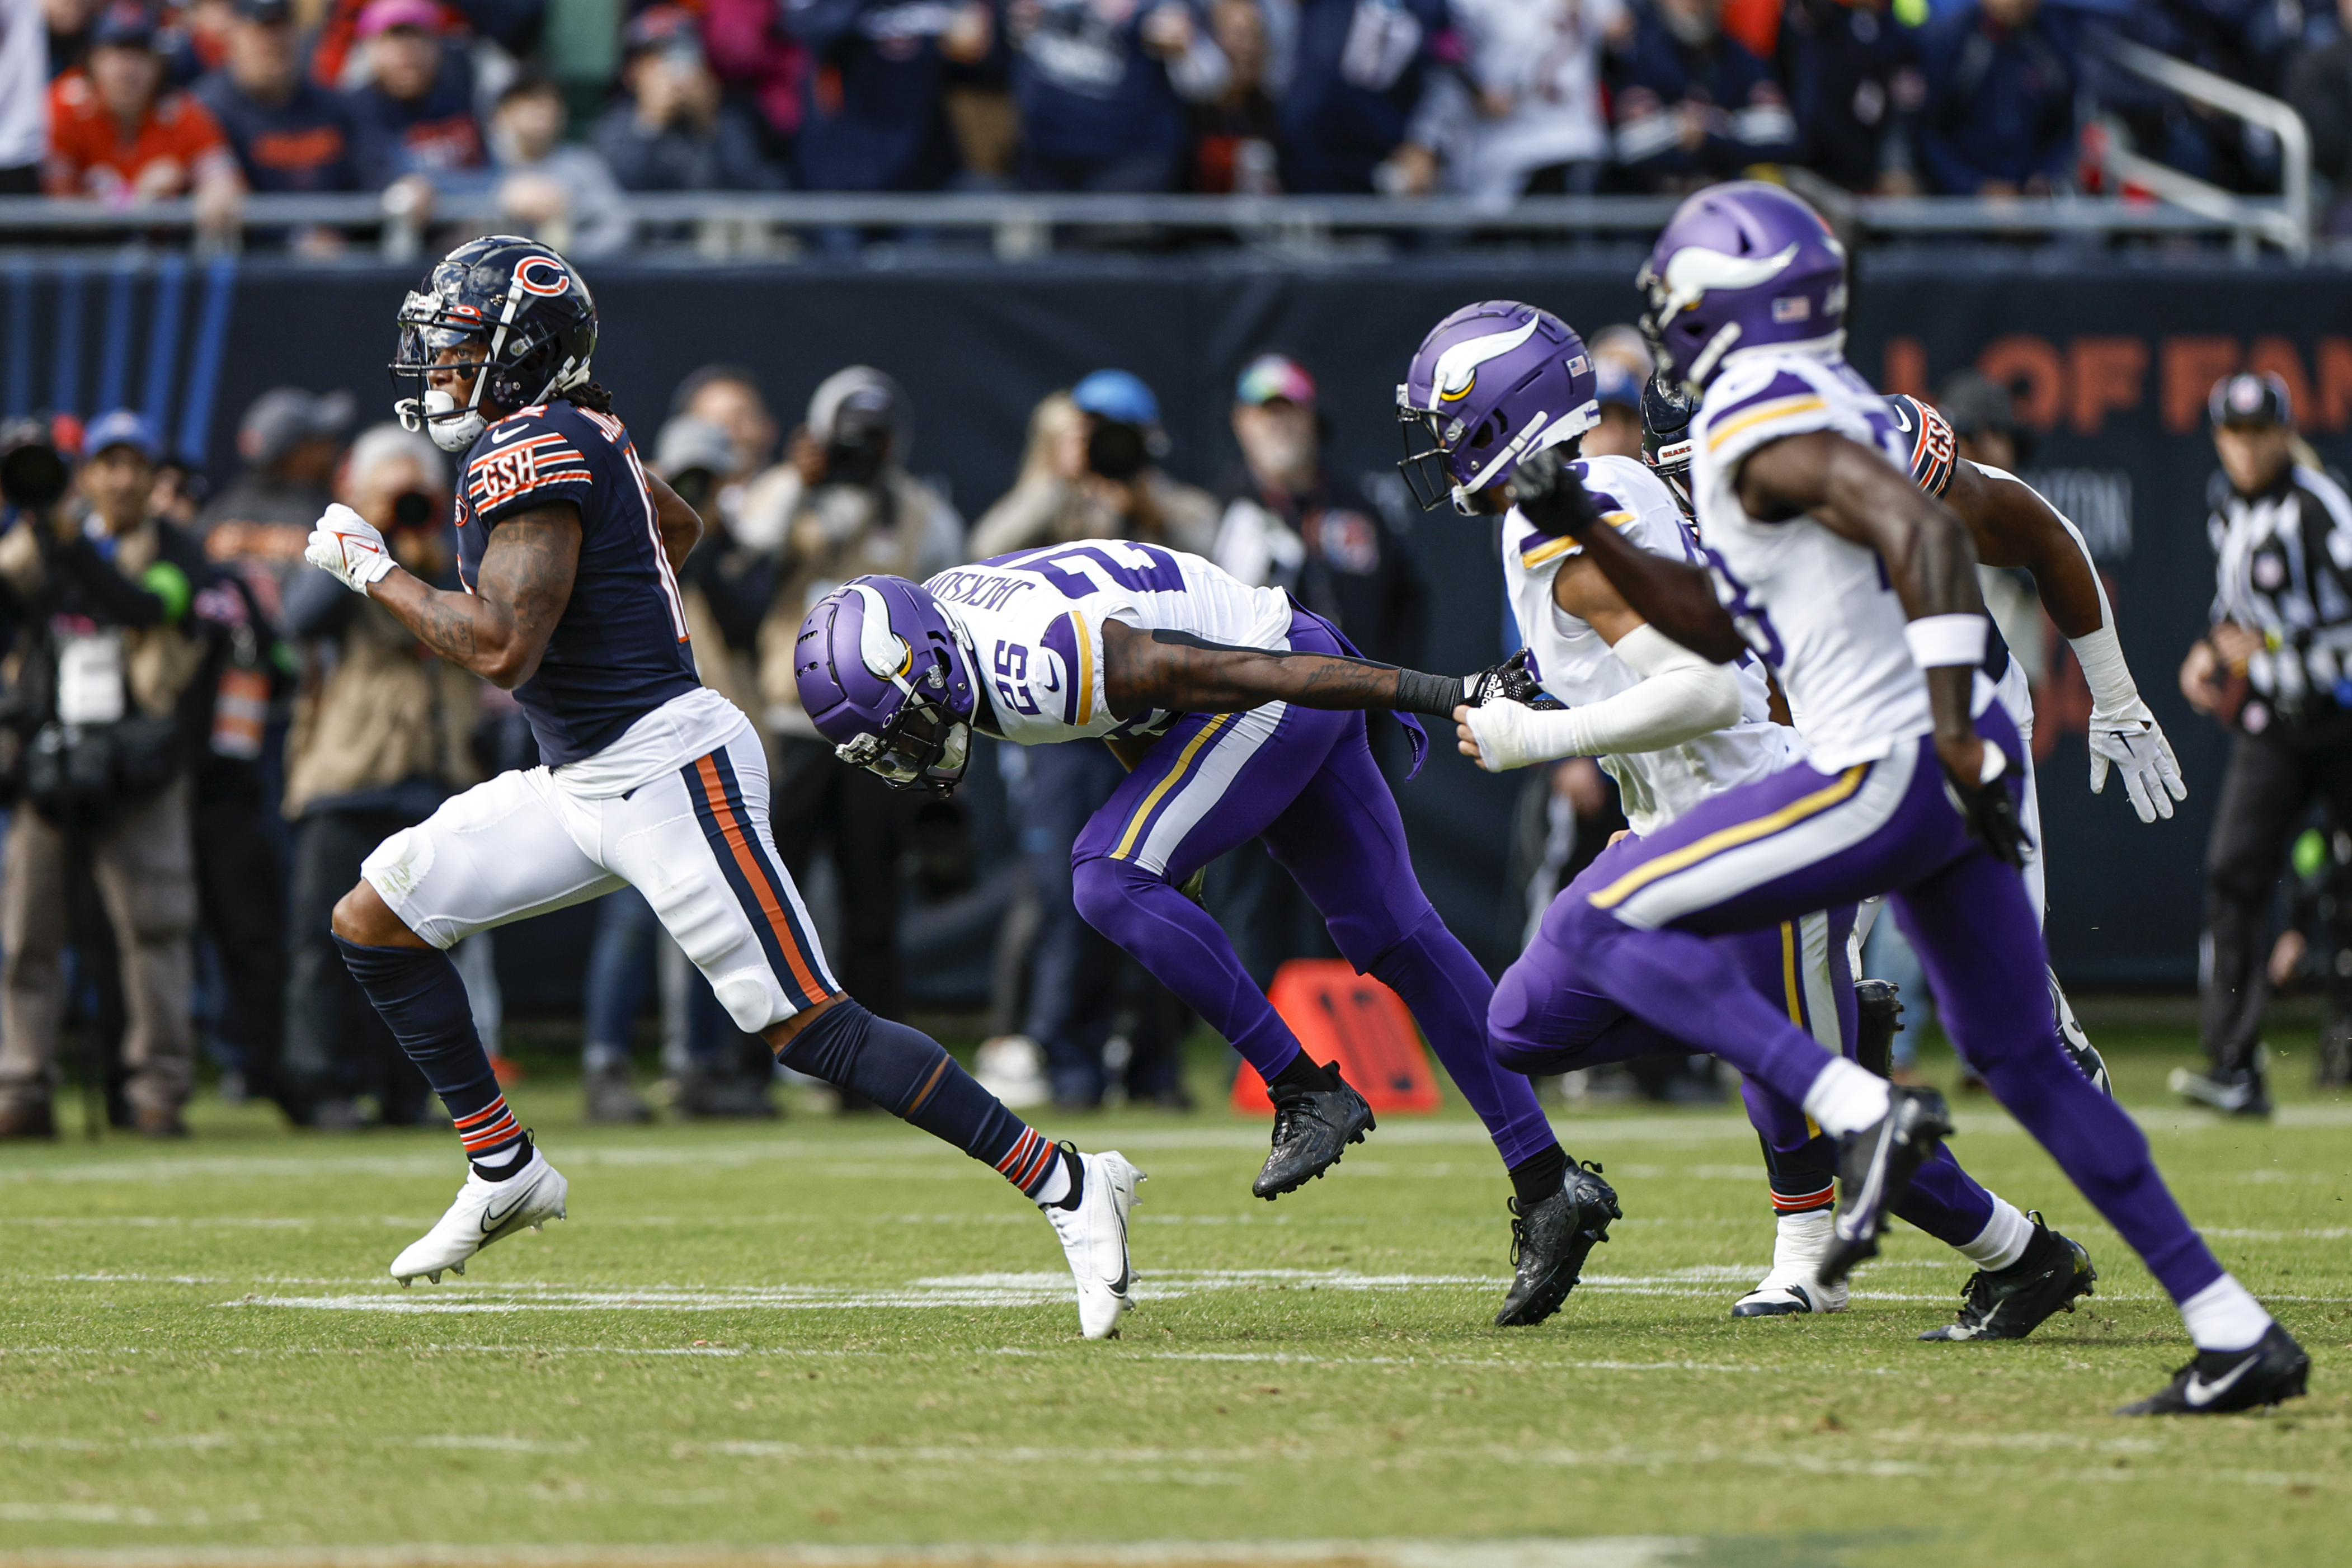 How to Watch Vikings vs. Bears Livestream Free Online Without Cable